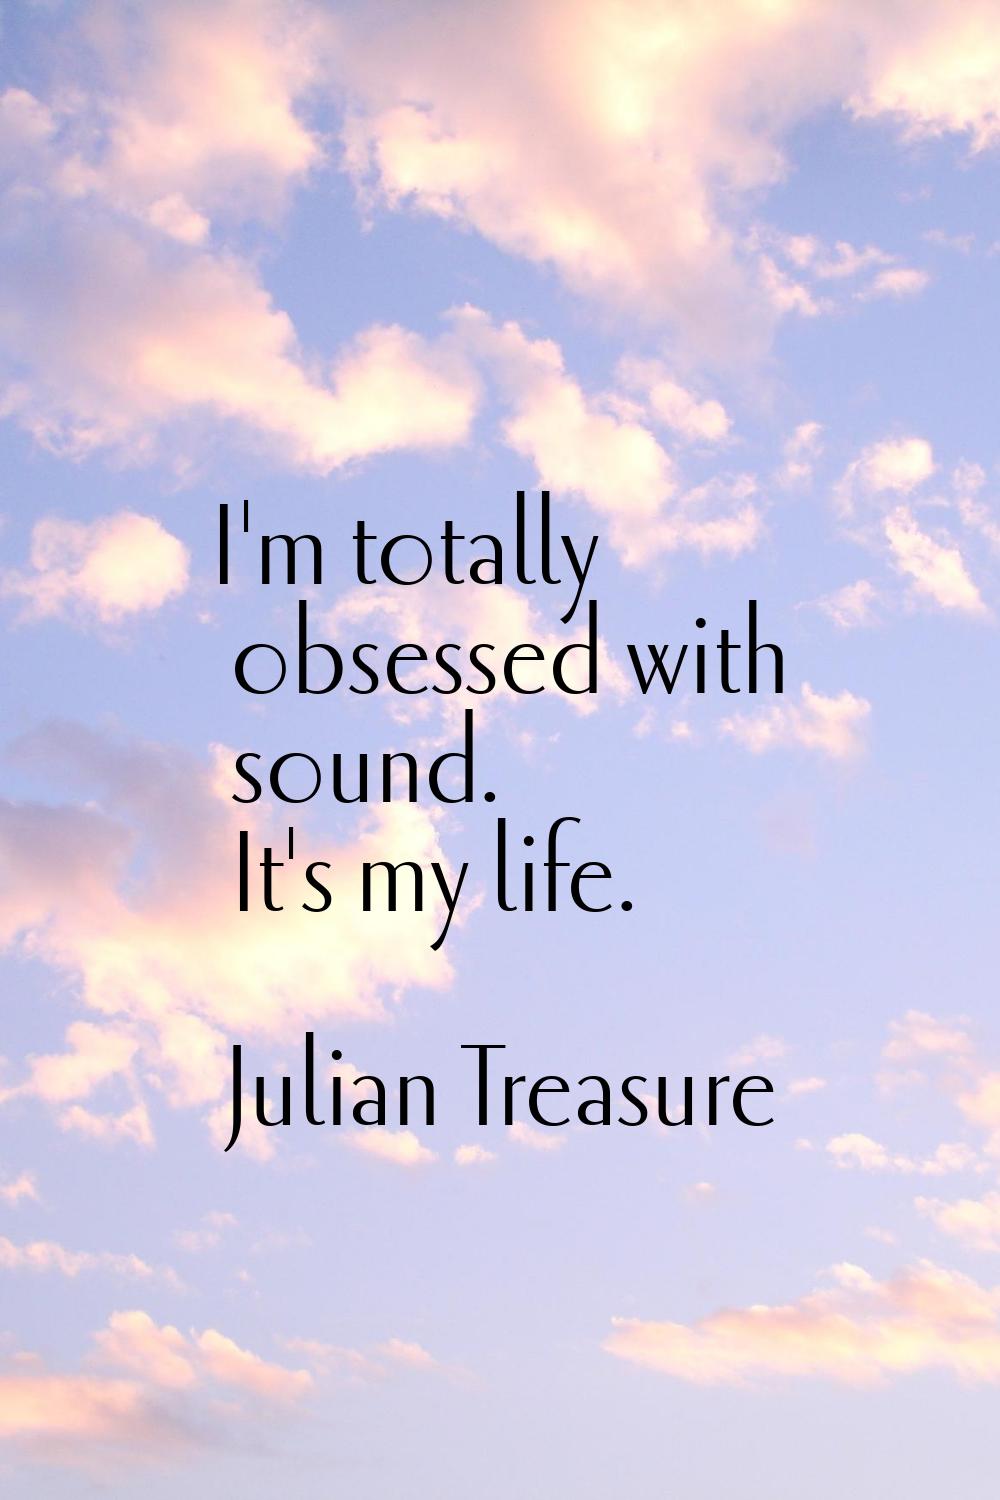 I'm totally obsessed with sound. It's my life.